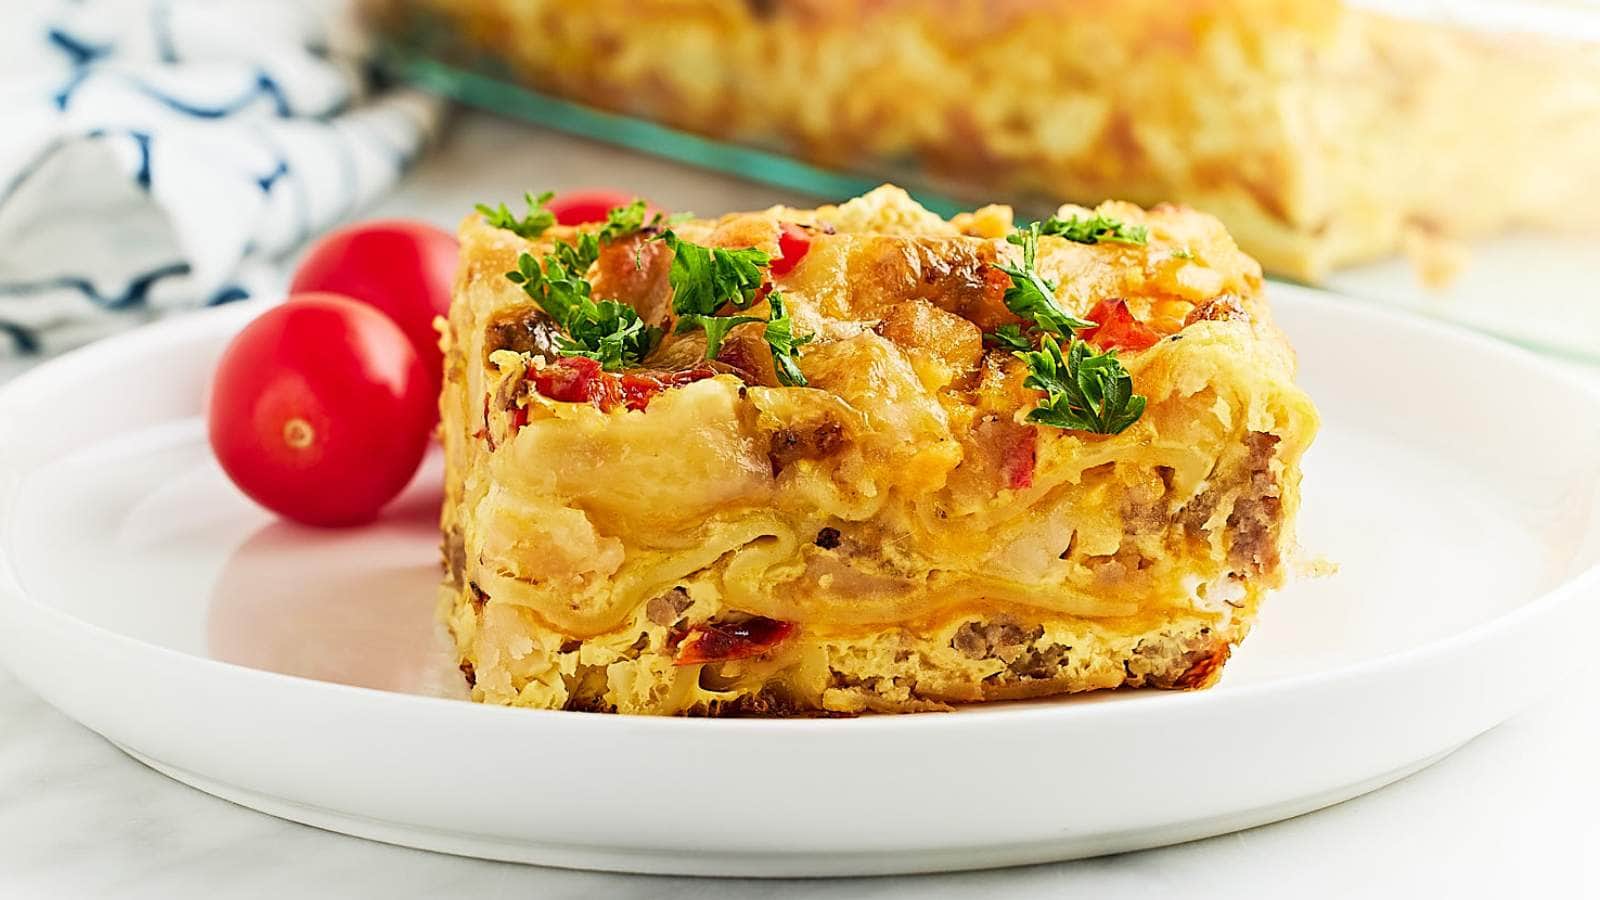 <p>This <strong>Breakfast Lasagna</strong>, with its hearty layers and savory breakfast flavors, is a comforting and satisfying dish that's sure to become a favorite in your home. It's a deliciously satisfying way to start the day, loaded with delicious breakfast sausage, fresh bell peppers, and melted cheese layered between lasagna noodles.</p><p><strong>Get the Recipe: <a href="https://cheerfulcook.com/breakfast-lasagna/" rel="noreferrer noopener">Breakfast Lasagna</a></strong></p>